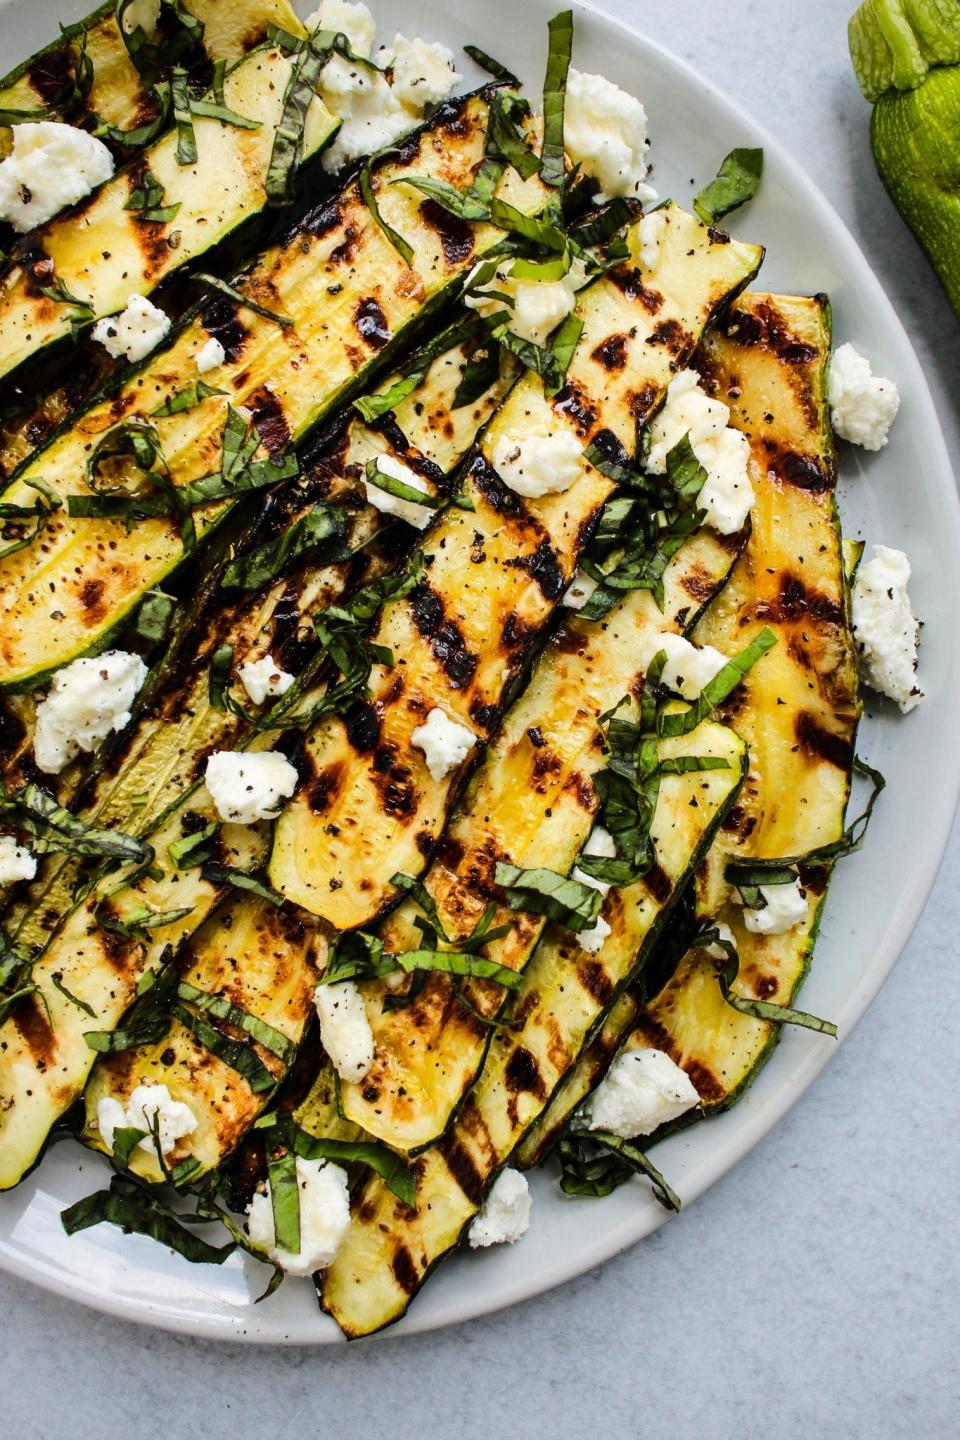 Slices of grilled zucchini topped with herbs and cheese on a white plate